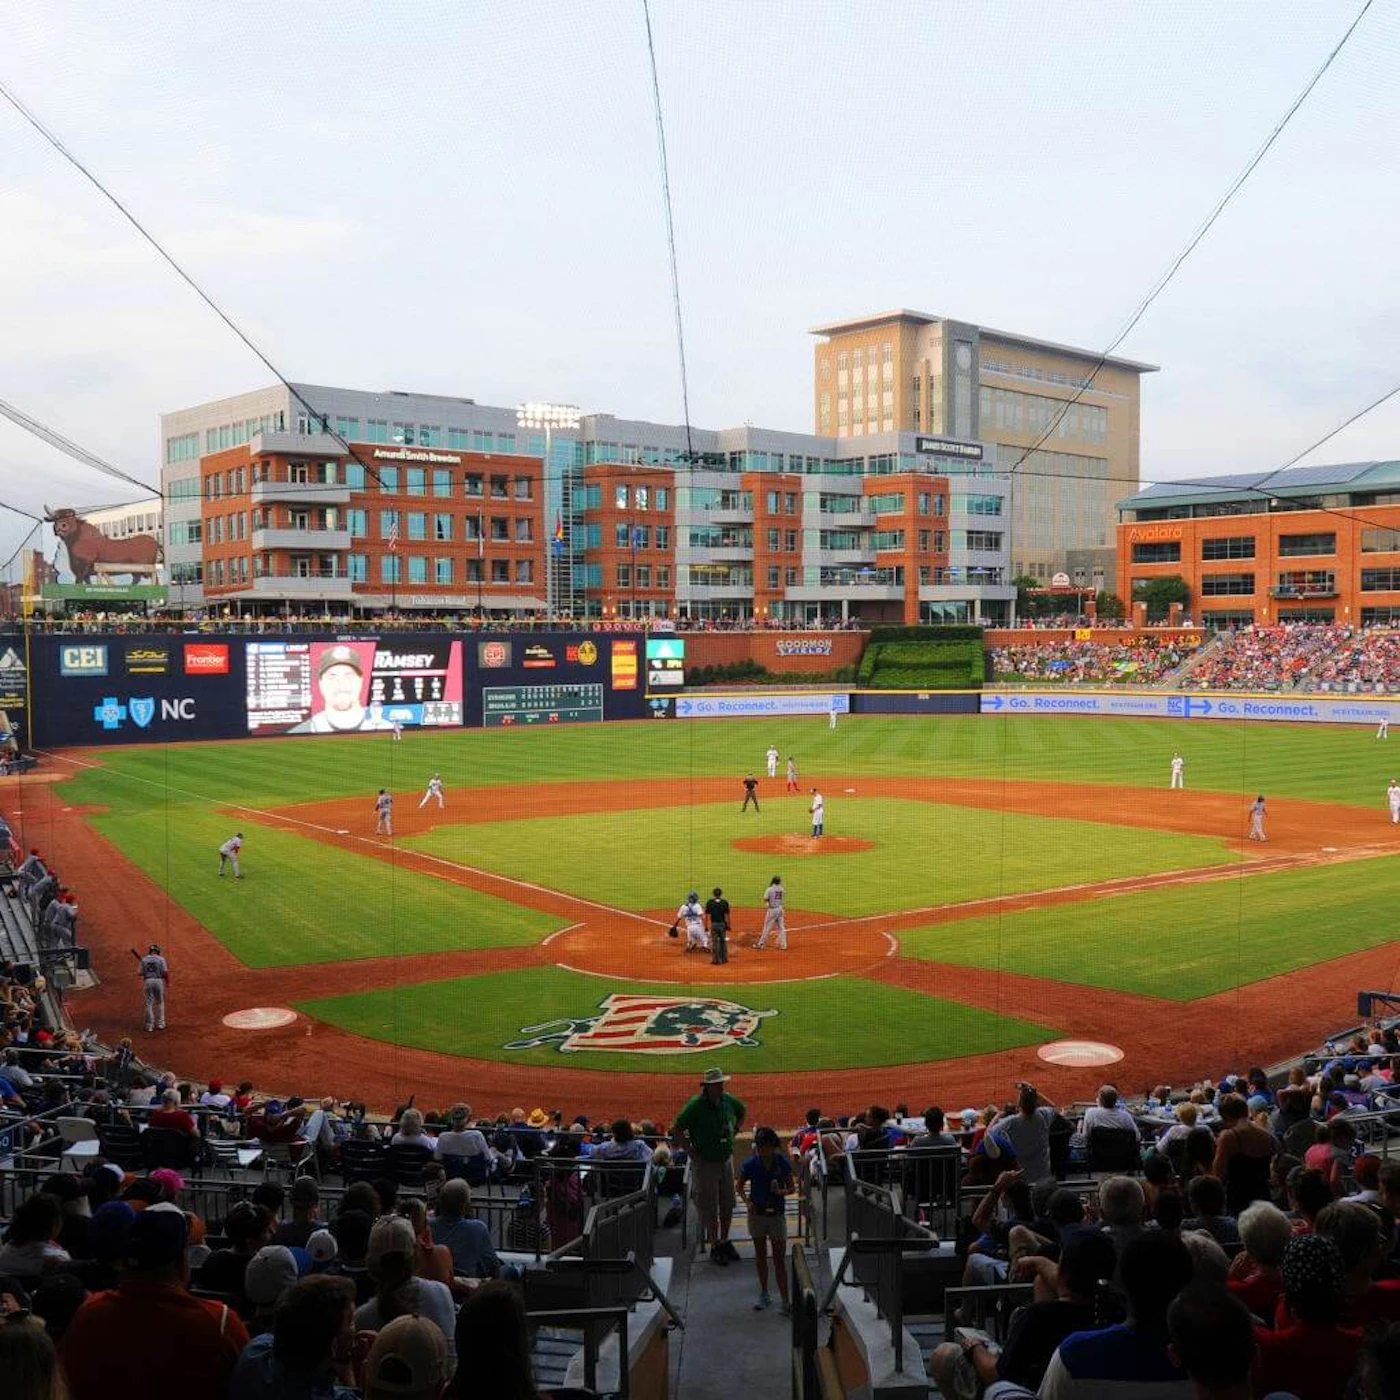 The Durham Bulls Athletic Park, one of the finest ballparks you'll find anywhere. (Photo: Durham Bulls)